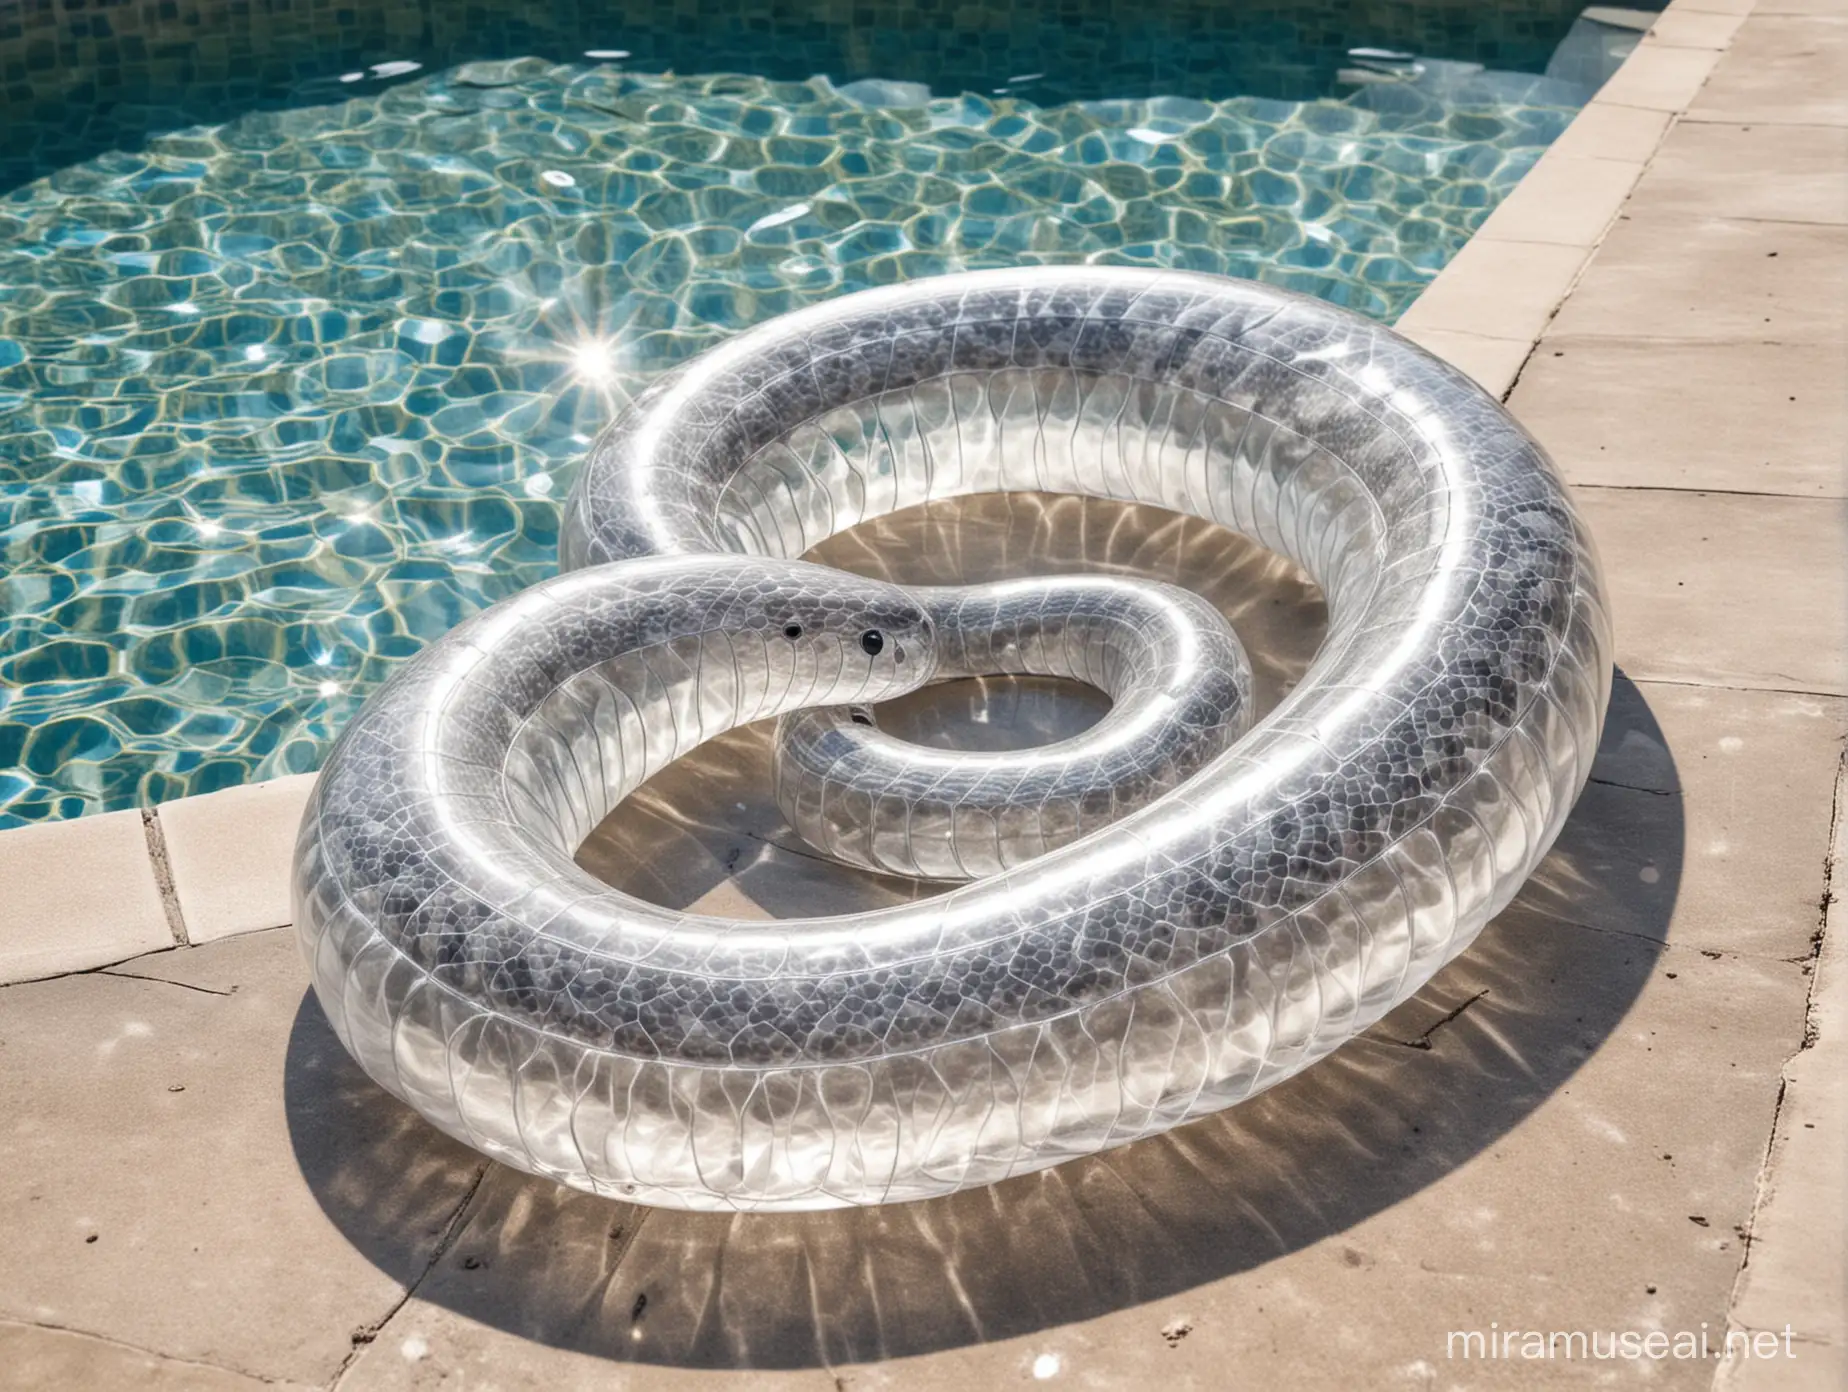 Clear transparent plastic inflatable snake in the pool.
Soft sun light comes from the right.
